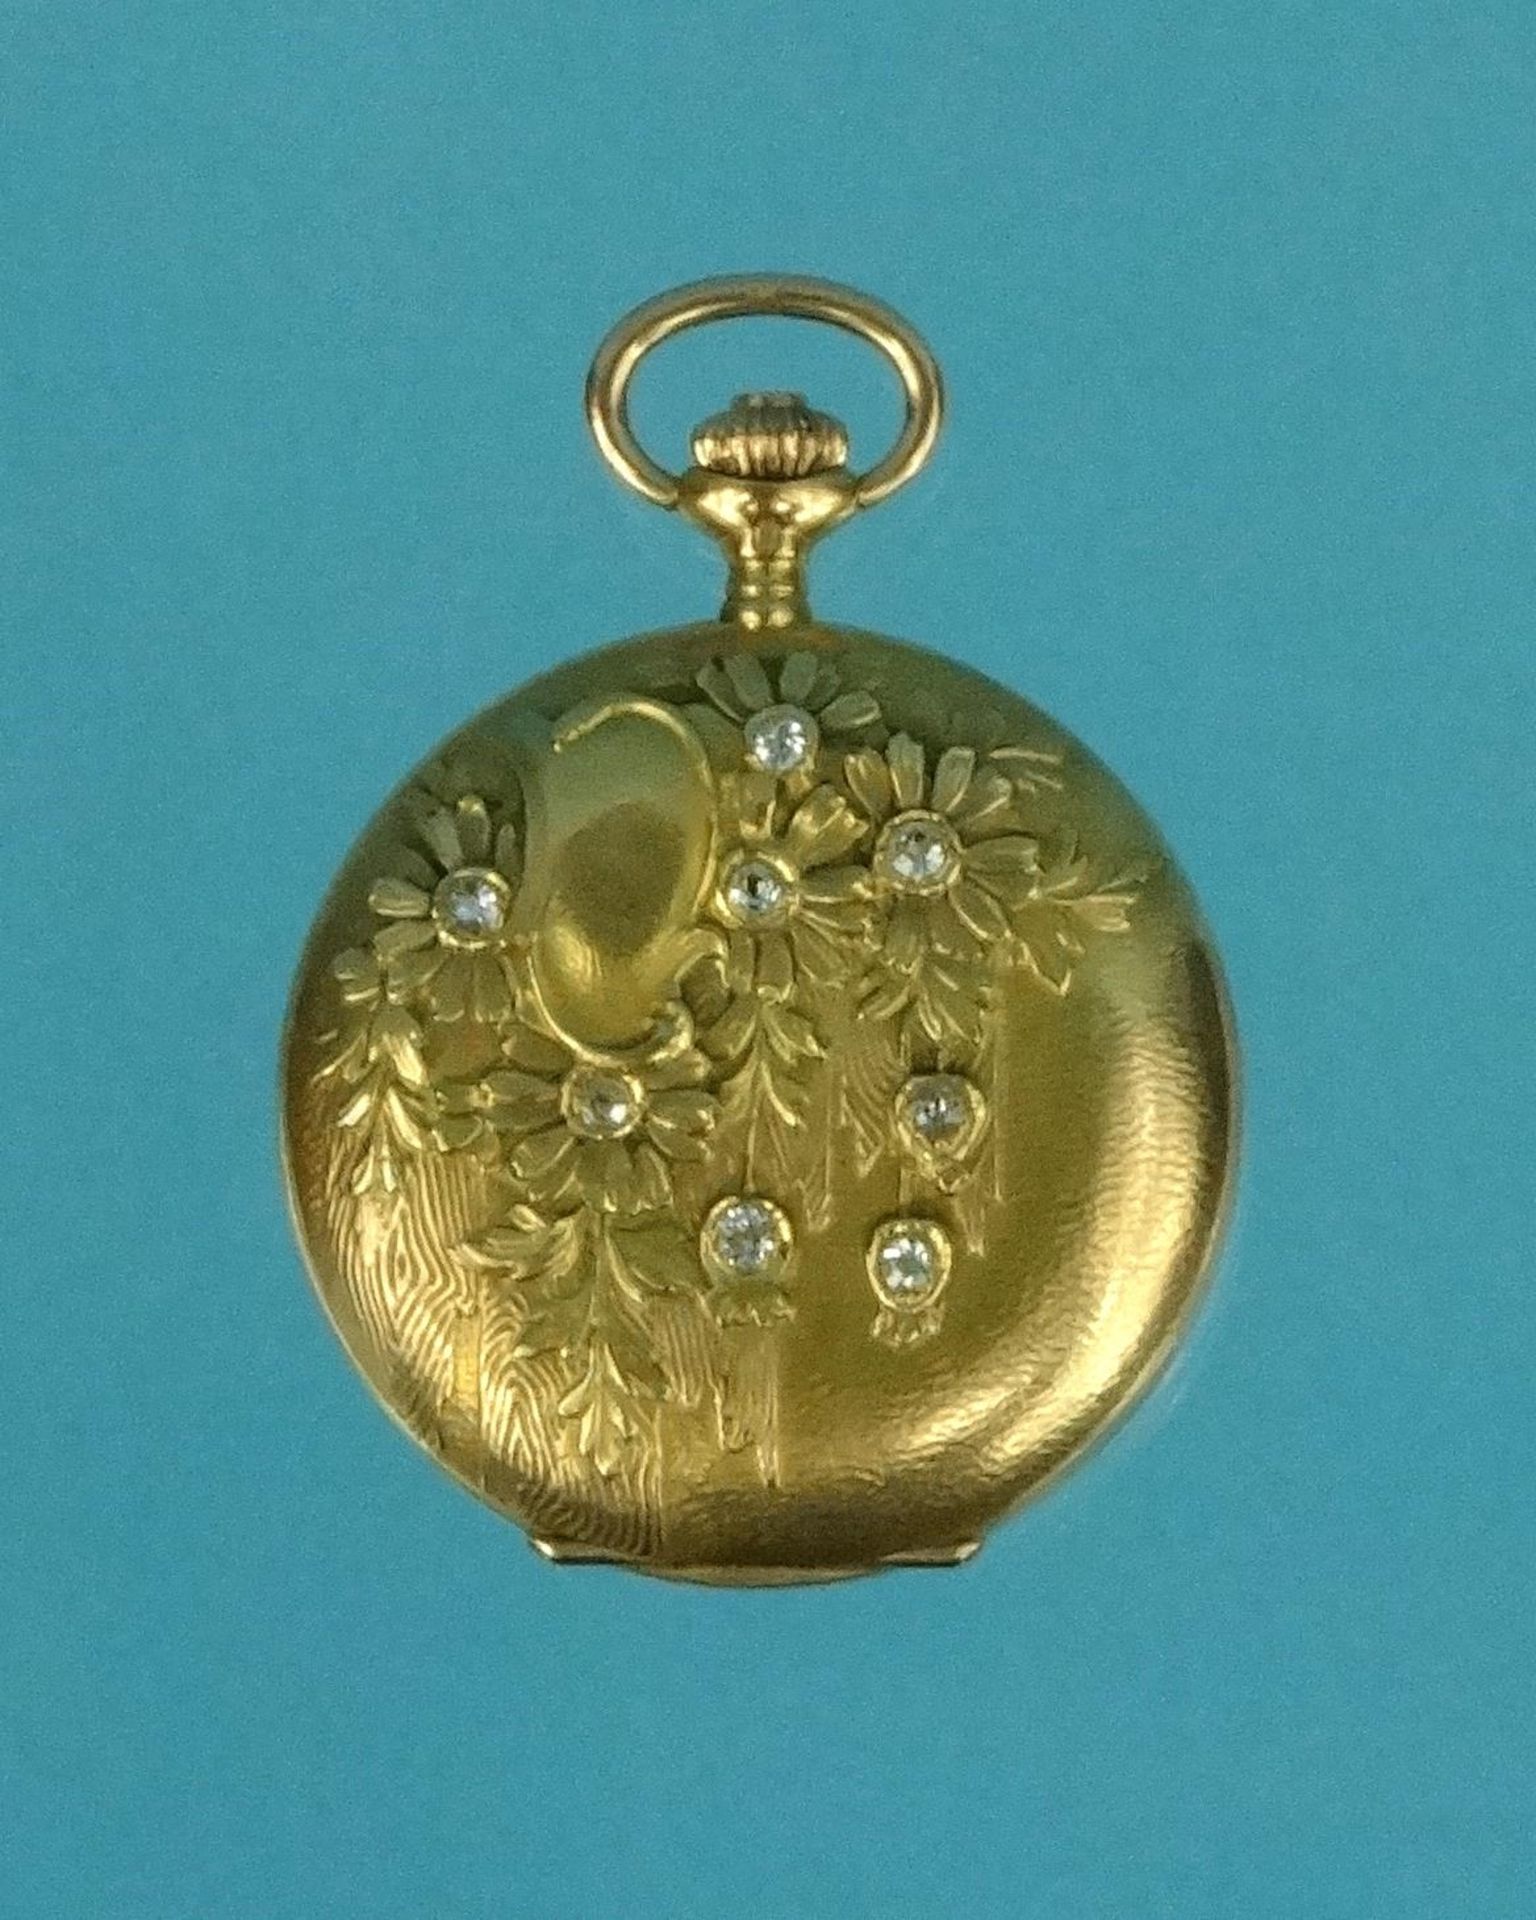 Antique 18 ct gold and Diamond pocket watch,signed L. Perrenoud & Co - Image 2 of 5